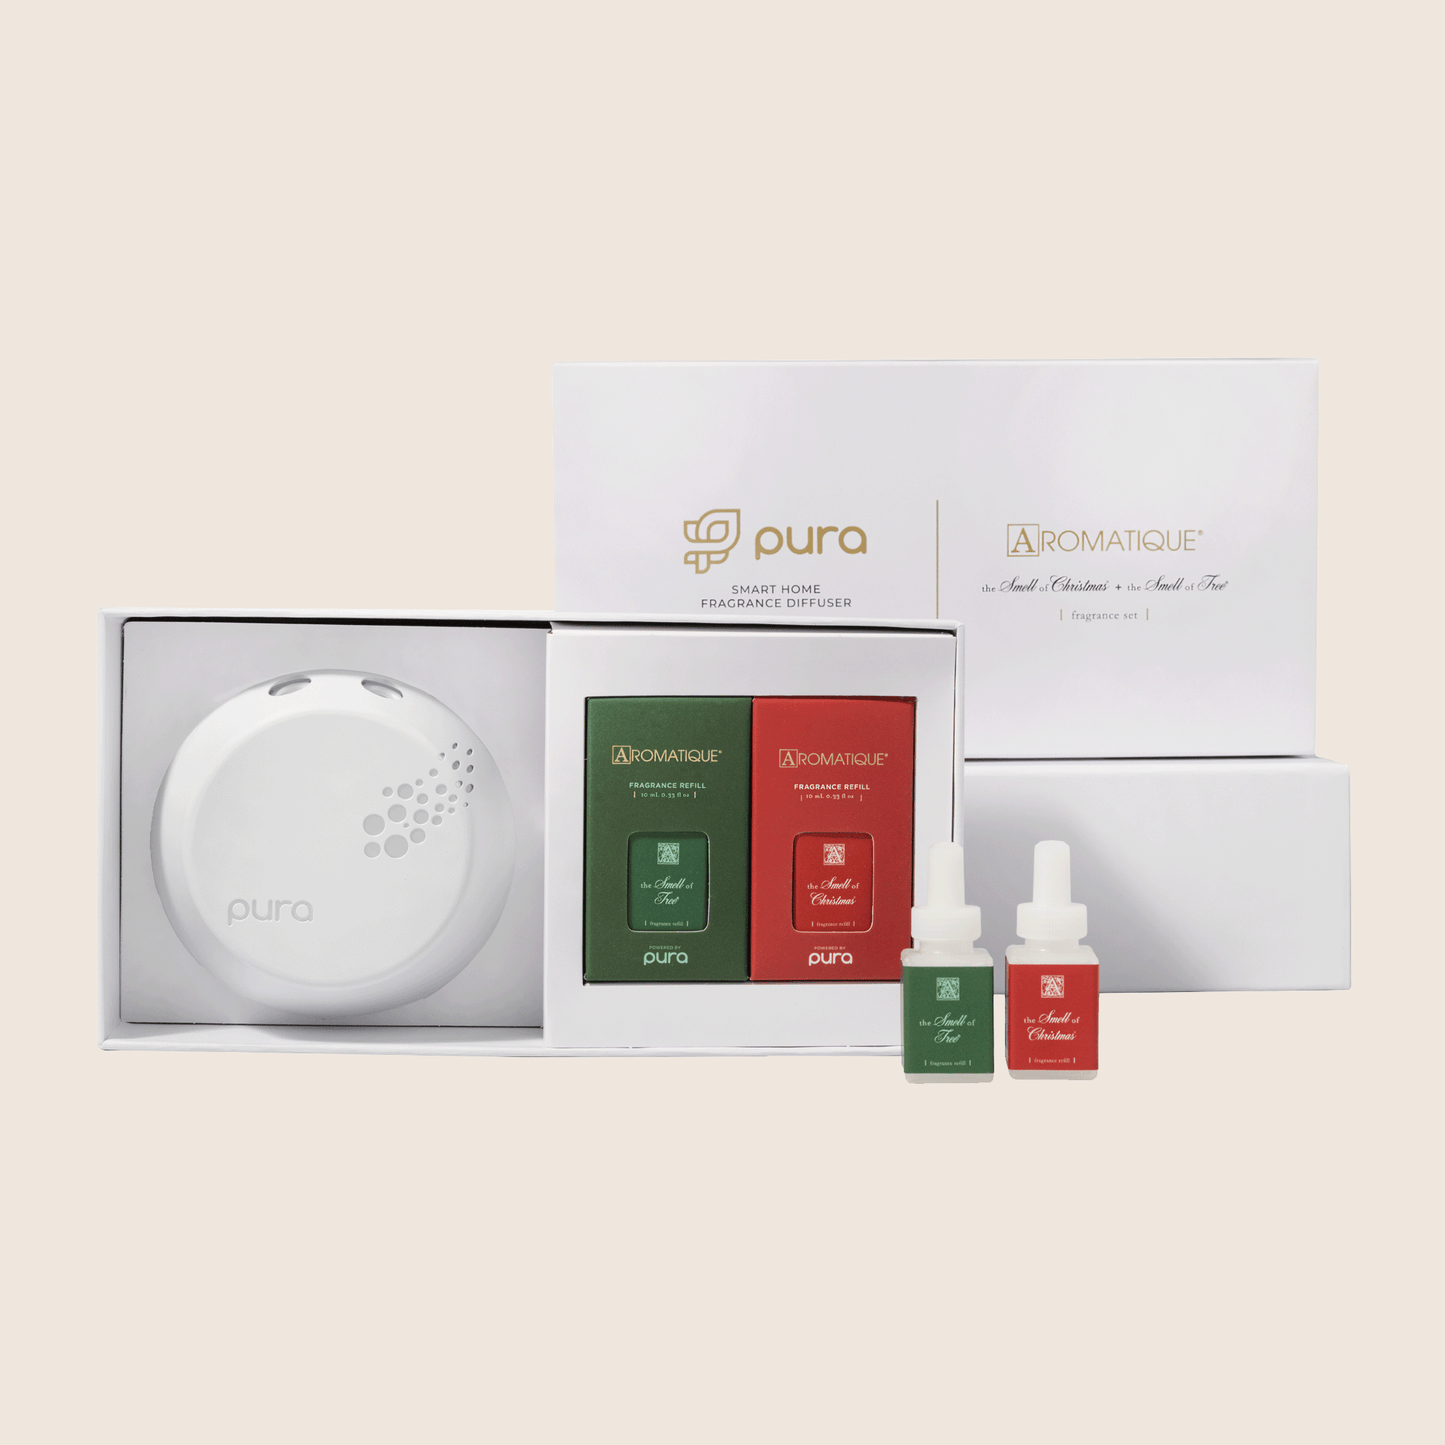 Pura Smart Fragrance Diffuser Gift Set- The Smell of Christmas + Smell of The Tree by Aromatique